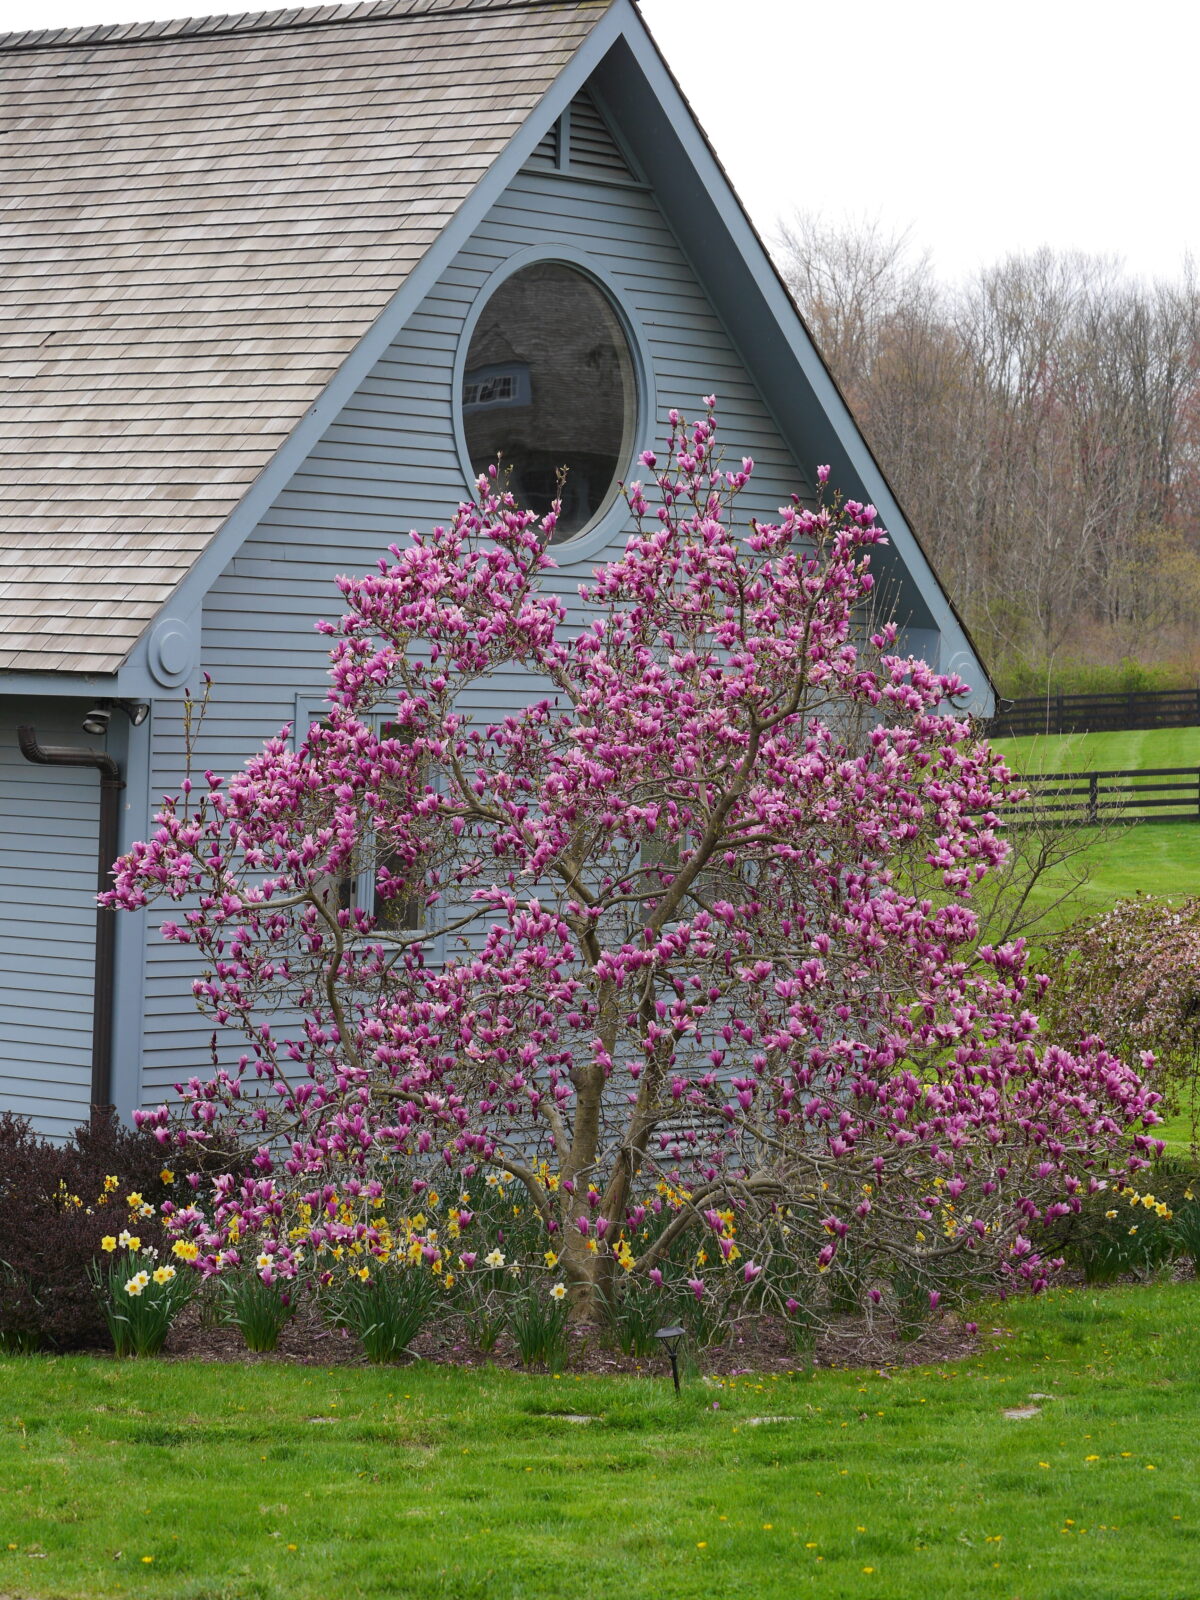 One of my favorite Magnolia shots is this traditional but short Magnolia perfectly set off the end of this cottage by a horse pasture. The richly colored flowers are not yet fully open but the color is magnificent.
ANDREW MESSINGER